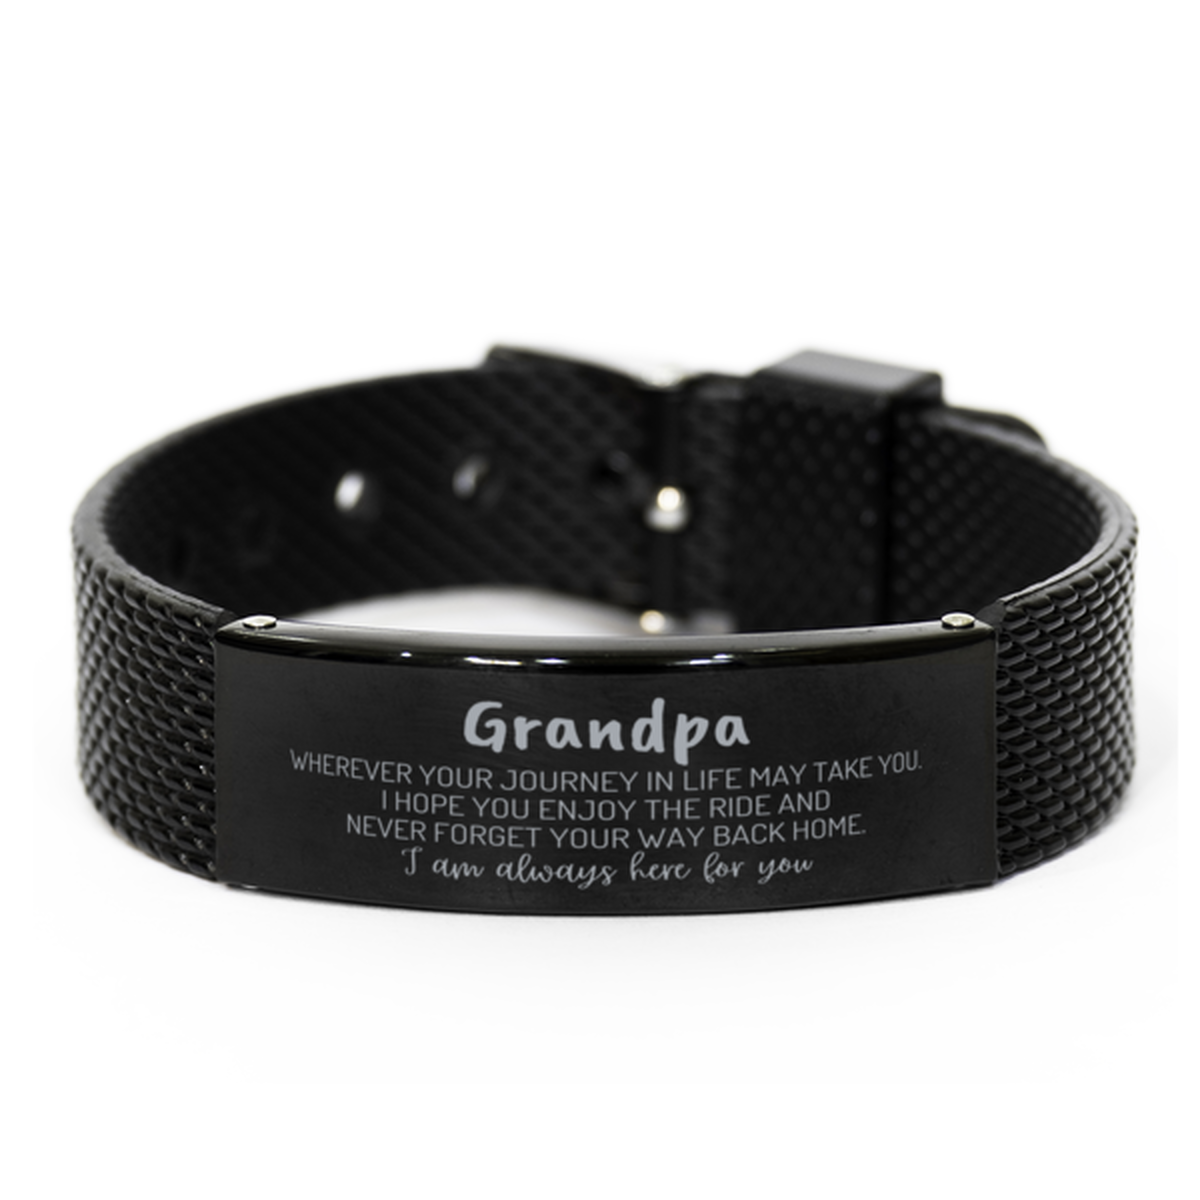 Grandpa wherever your journey in life may take you, I am always here for you Grandpa Black Shark Mesh Bracelet, Awesome Christmas Gifts For Grandpa, Grandpa Birthday Gifts for Men Women Family Loved One